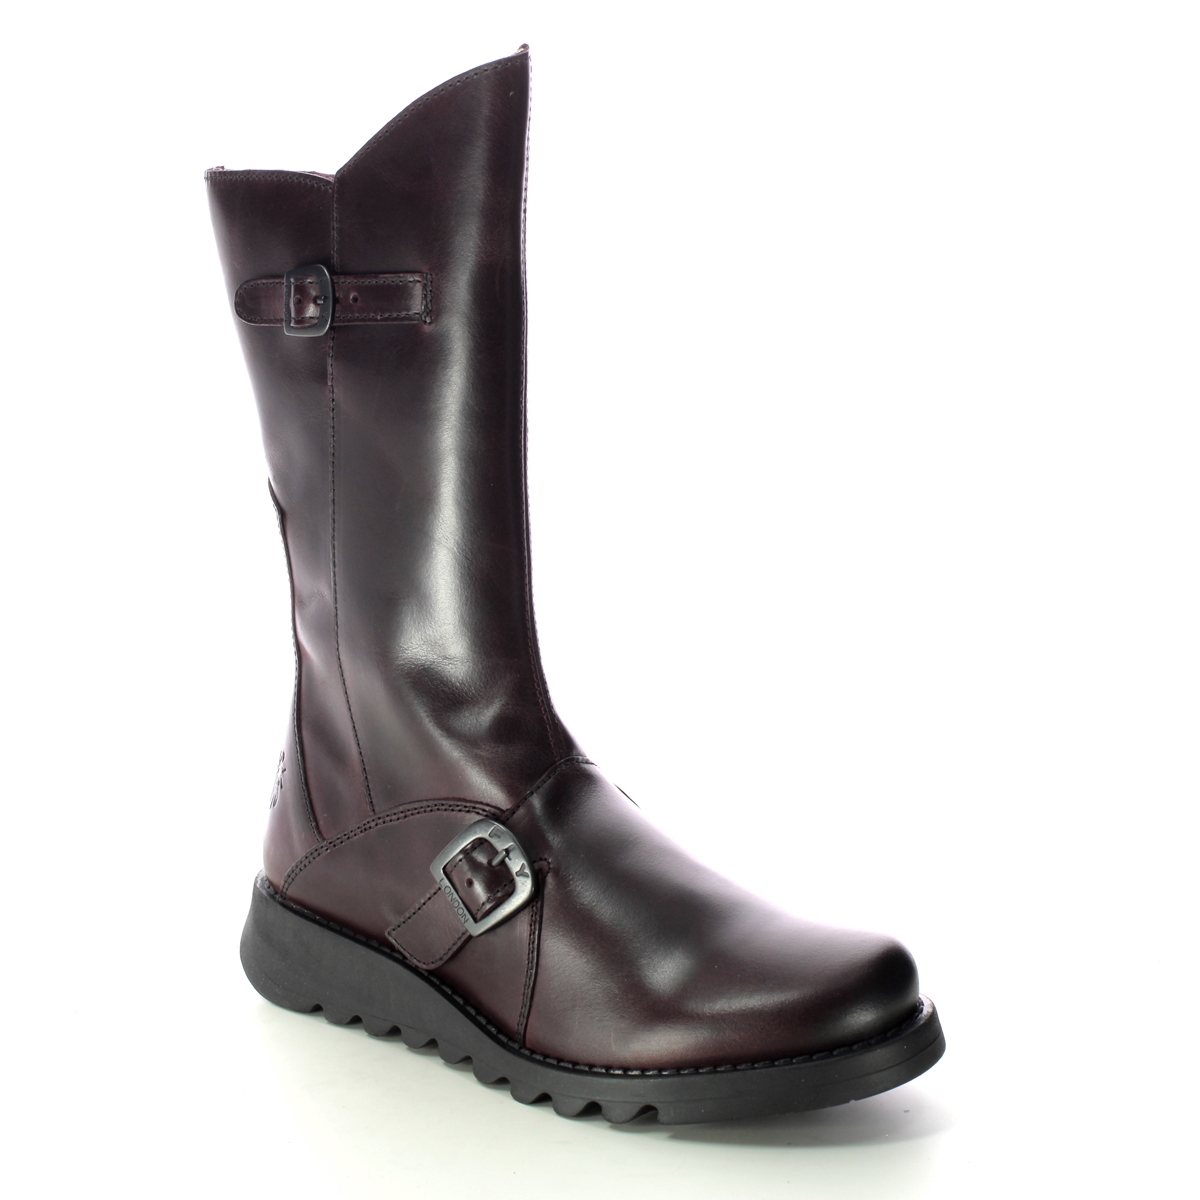 Fly London Mes 2 Wine Leather Womens Mid Calf Boots P142913 In Size 38 In Plain Wine Leather